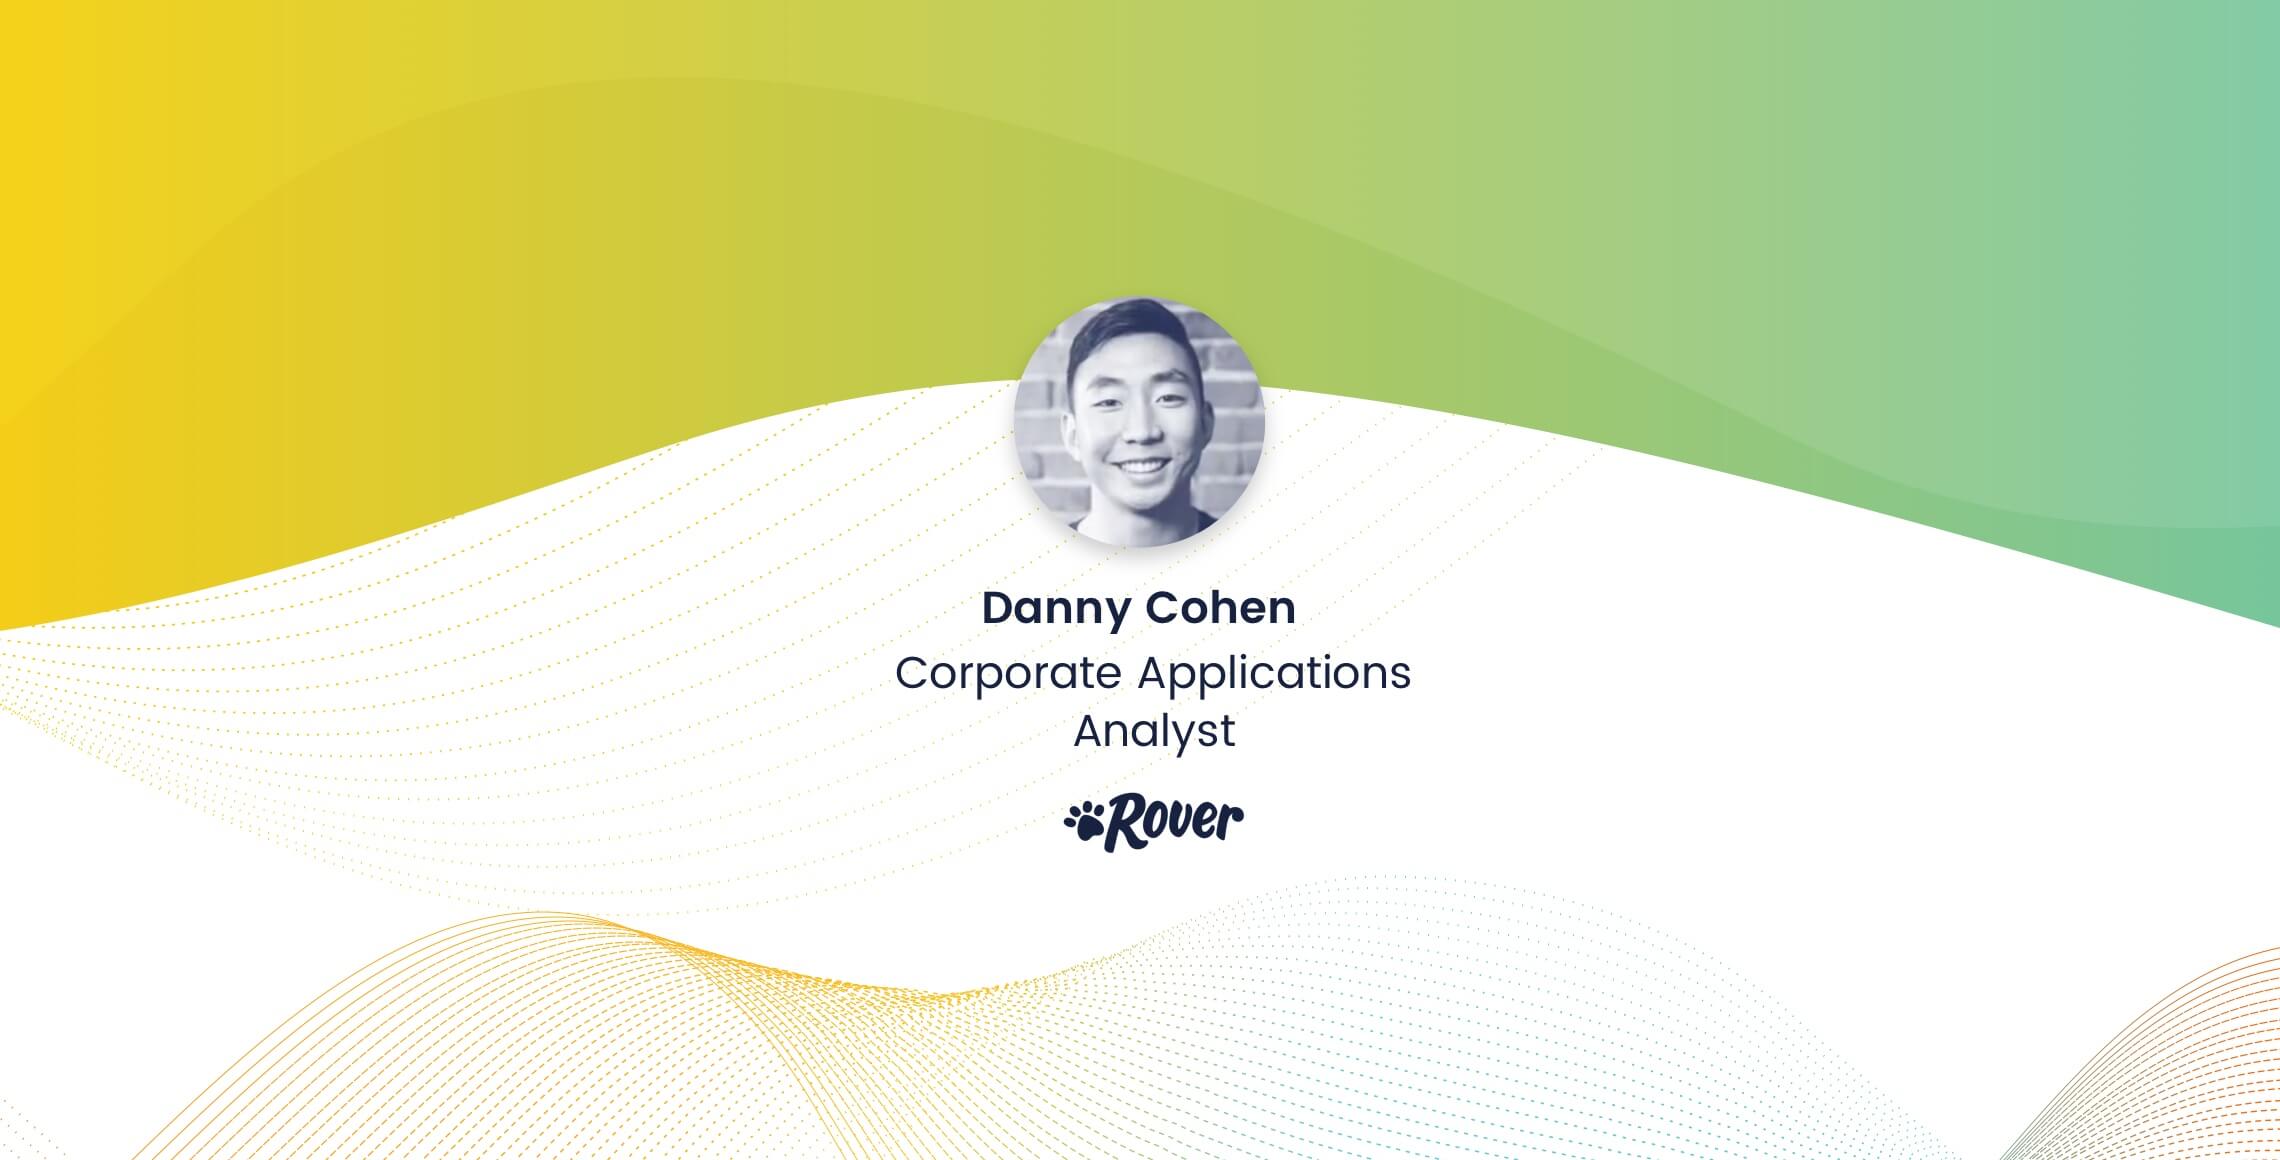 Danny Cohen, Corporate Applications Analyst, Rover.com